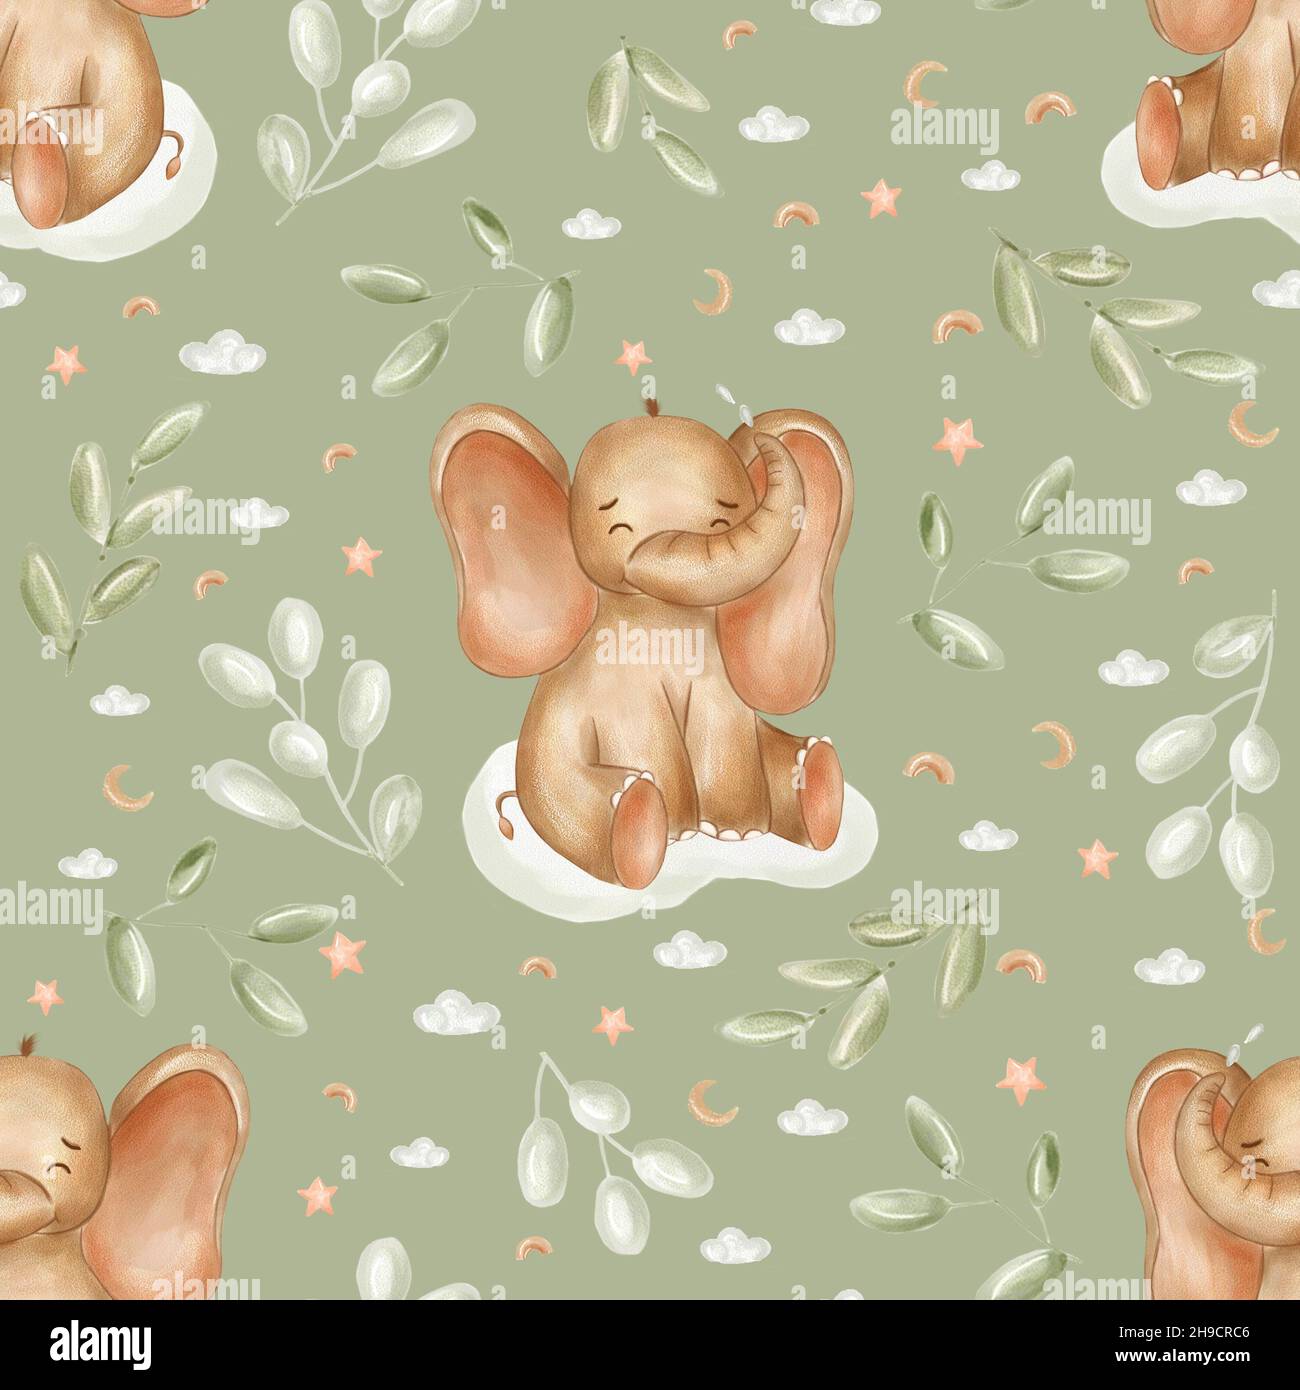 cute baby elephant wallpapers